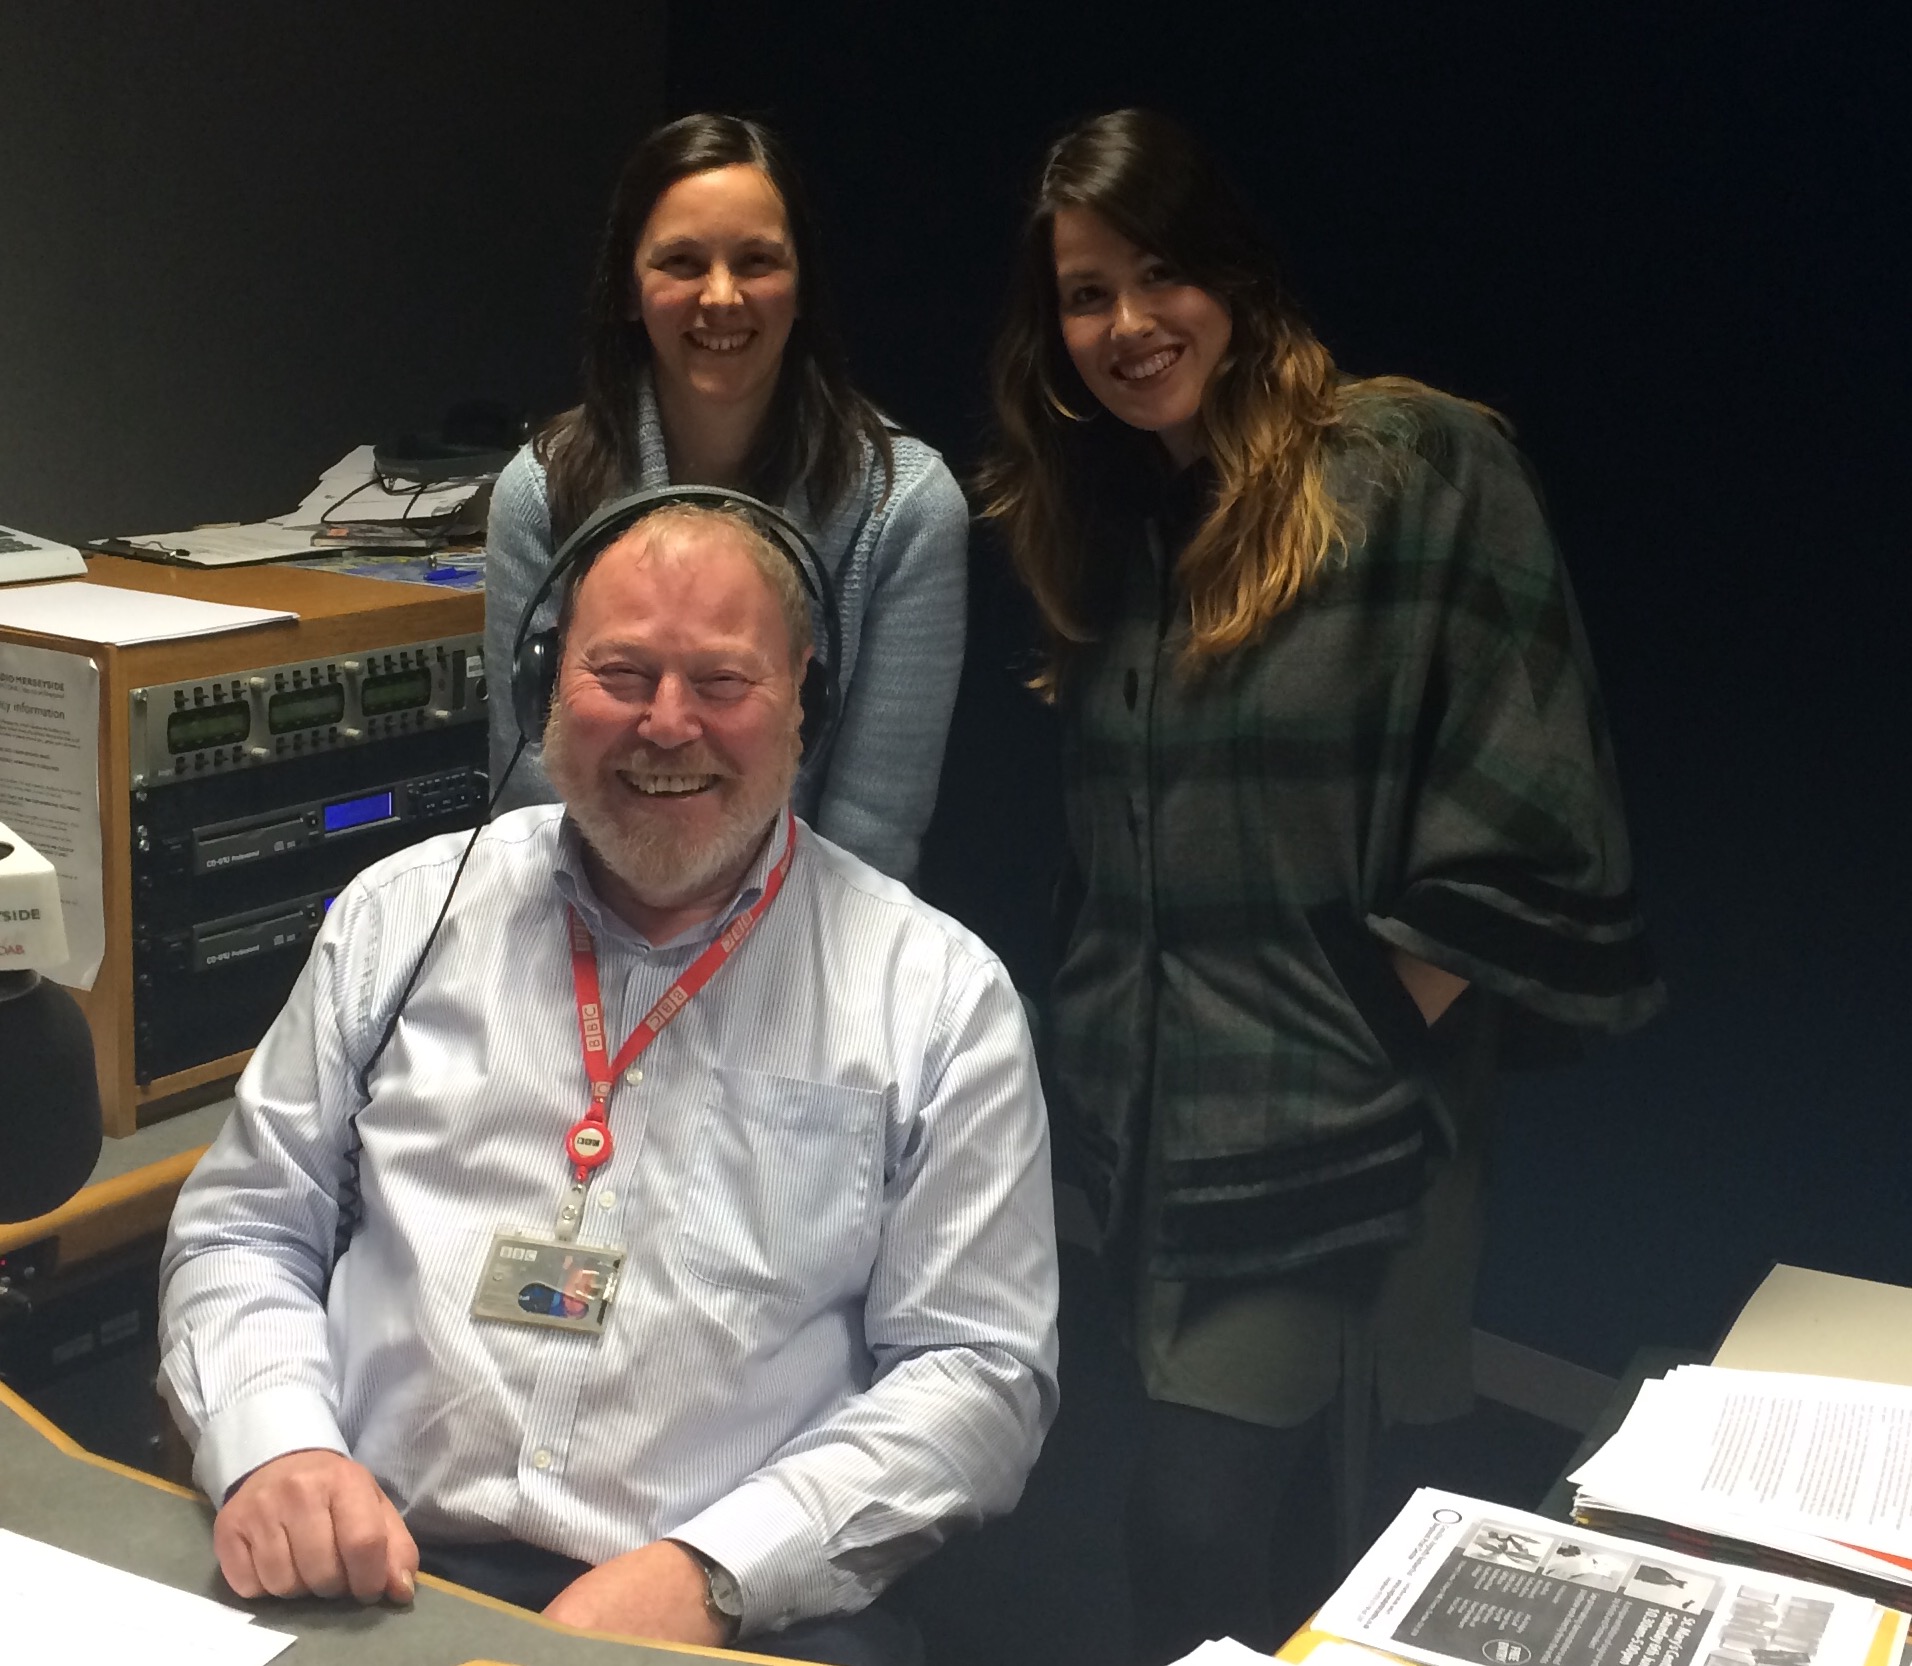 Emma and Colette joining Roger Phillips for a studio selfie at BBC Radio Merseyside!